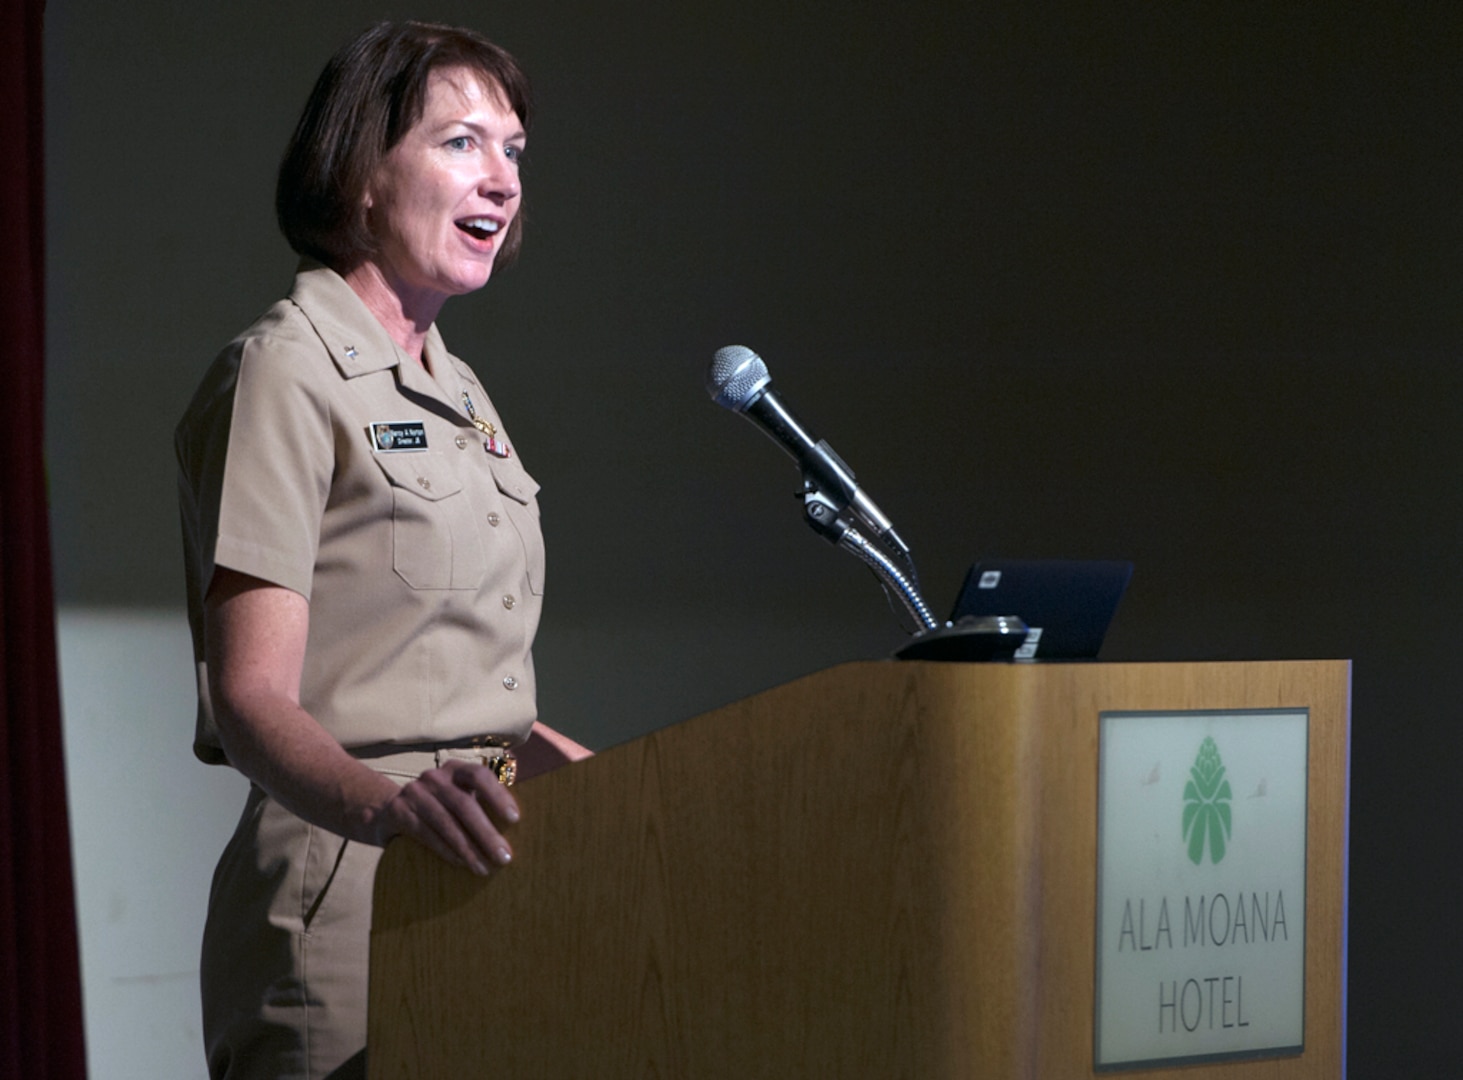 HONOLULU, Hawaii (Mar. 23, 2015) - U.S. Navy Rear Adm. Nancy Norton, U.S. Pacific Command (USPACOM) director for Command, Control, Communications and Cyber, provides opening remarks during the Multinational Communications Interoperability Program (MCIP) Planning Staff Workshop 2, in preparation for the upcoming humanitarian and disaster relief capstone event Pacific Endeavor (PE), at the Ala Moana Hotel. Pacific Endeavor is a series of events that occur each year designed to manage the momentum of the Indo-Asia Pacific rebalance and strengthen relationships with allies and partners by testing the communications response to a natural disaster. PE15 is scheduled to take place in Manila, Philippines, for approximately two weeks during the months of August and September and is set to involve 20 allied and partner nations. 